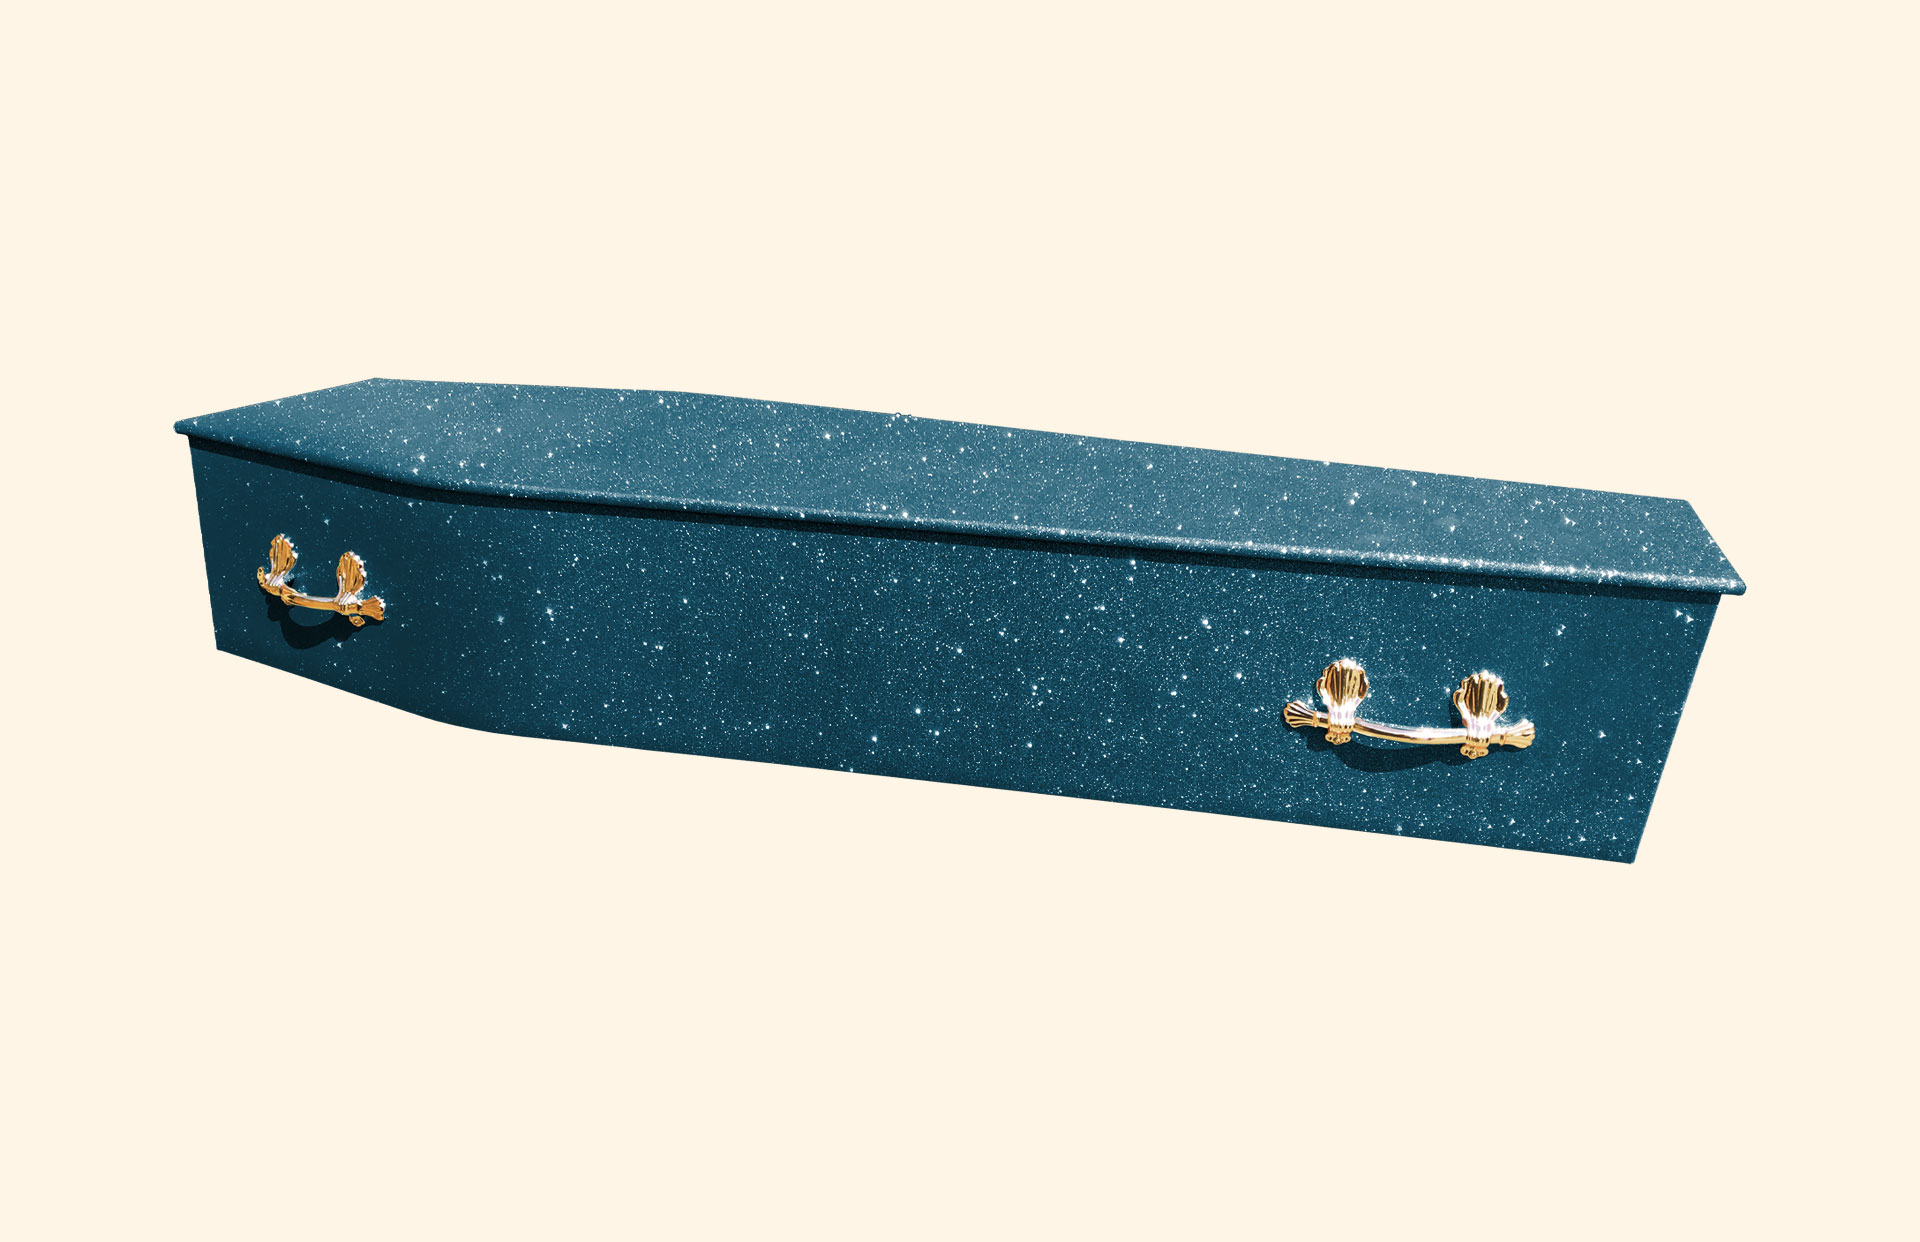 Midnight Blue Glitter over a traditional coffin